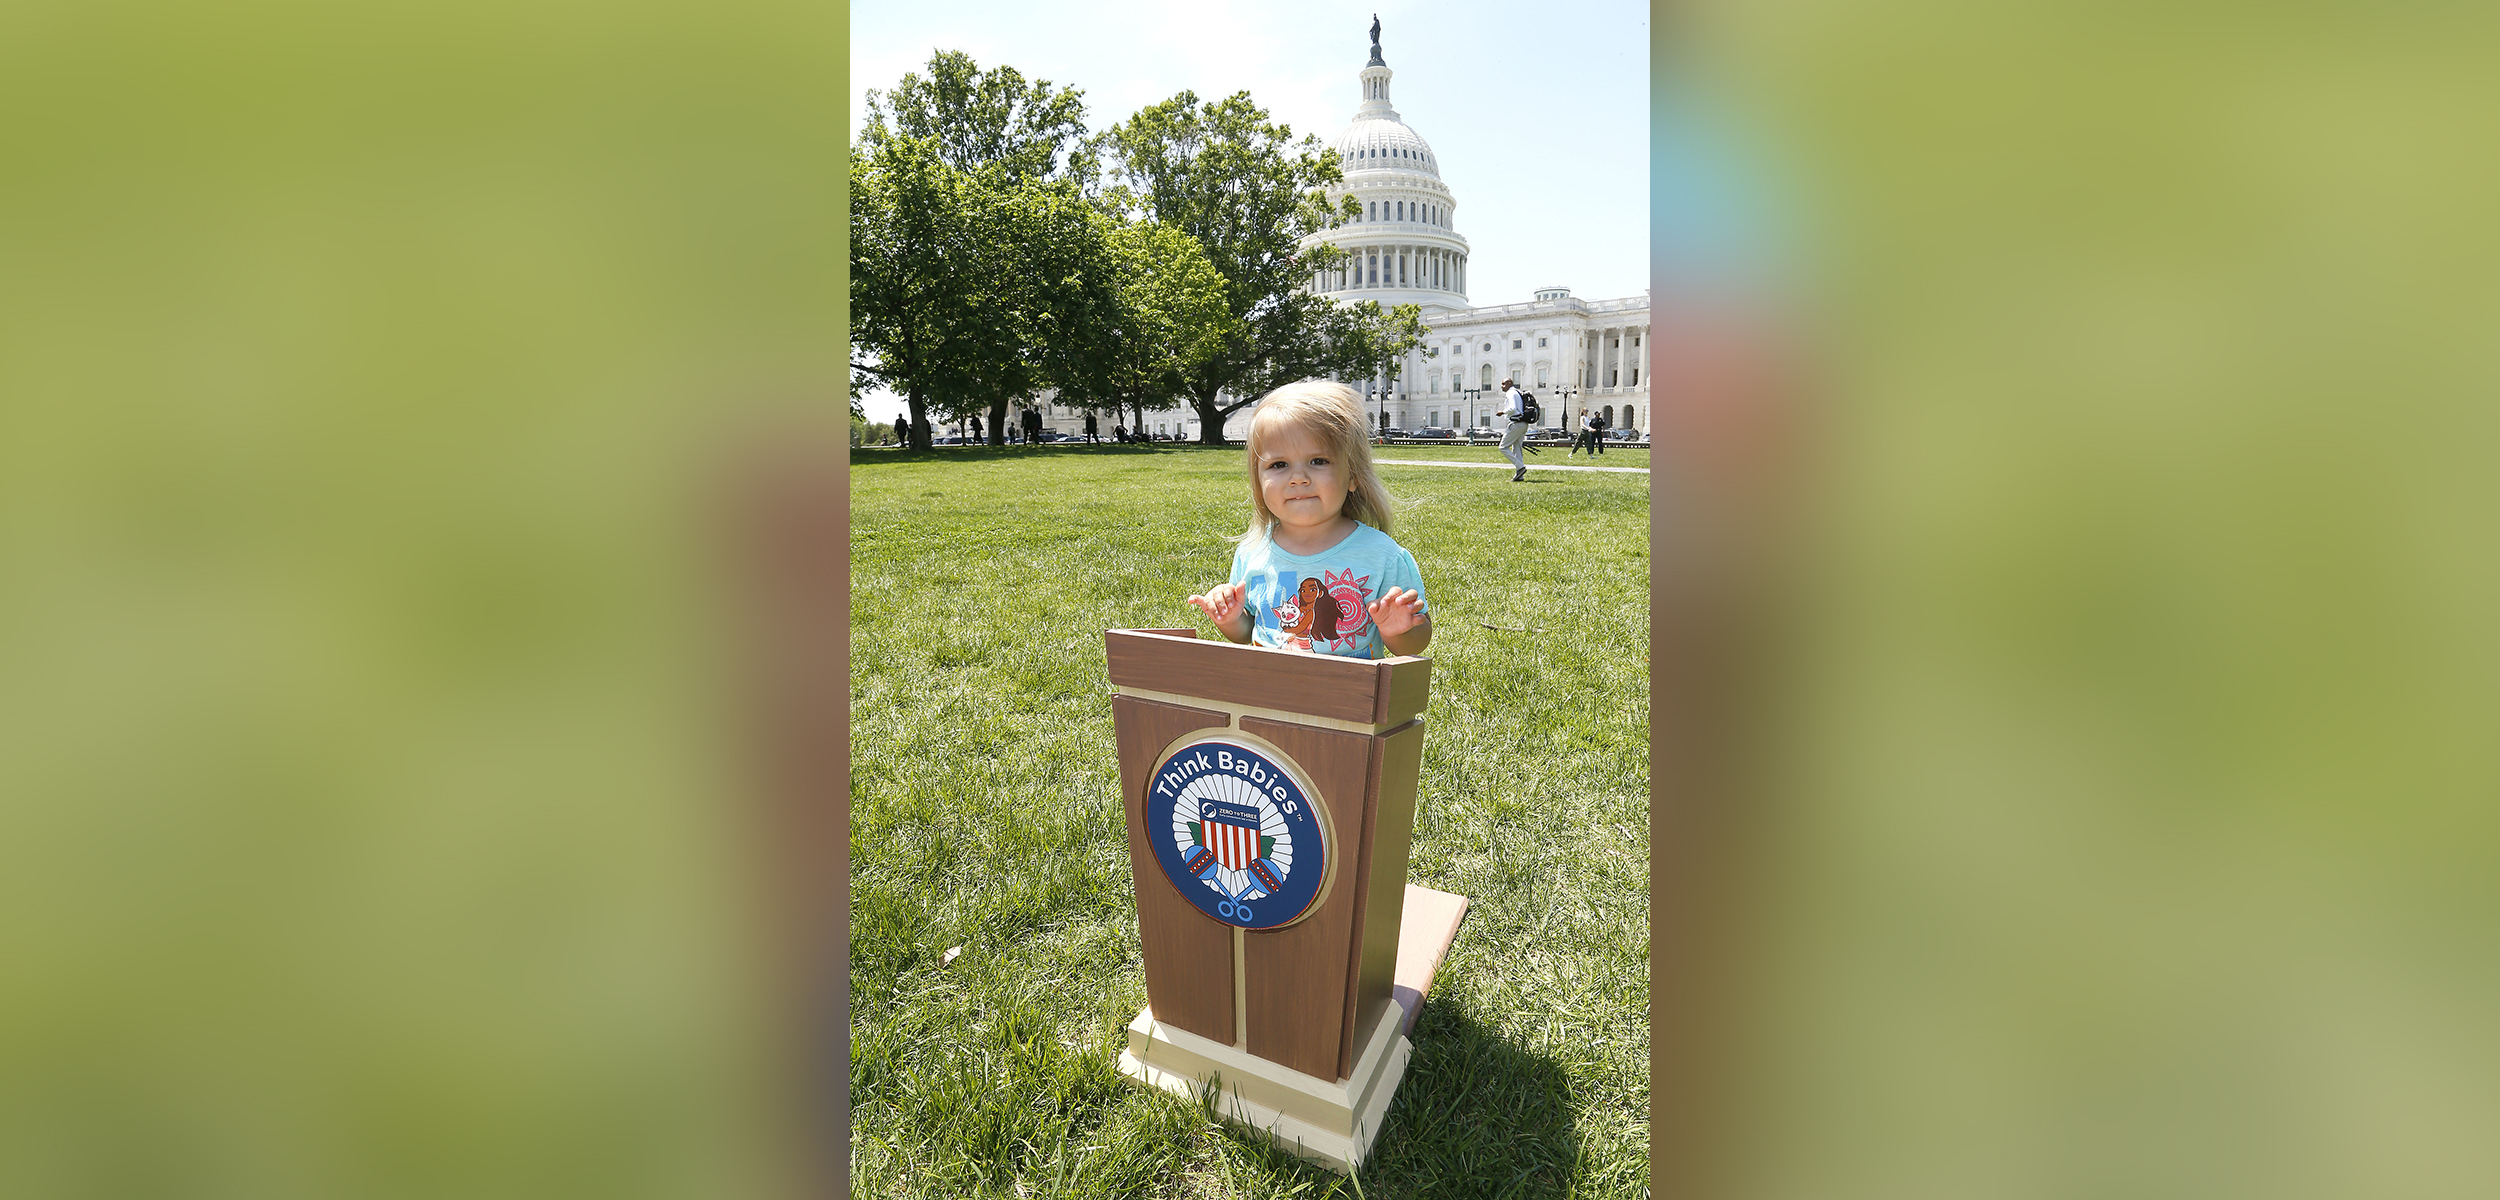 PHOTO: A toddler steps up to the podium on the East lawn of the U.S. Capitol Building during Zero To Three's second annual Strolling Thunder event to urge Congress to Think Babies and make the potential of every baby a national priority, May 8, 2018.